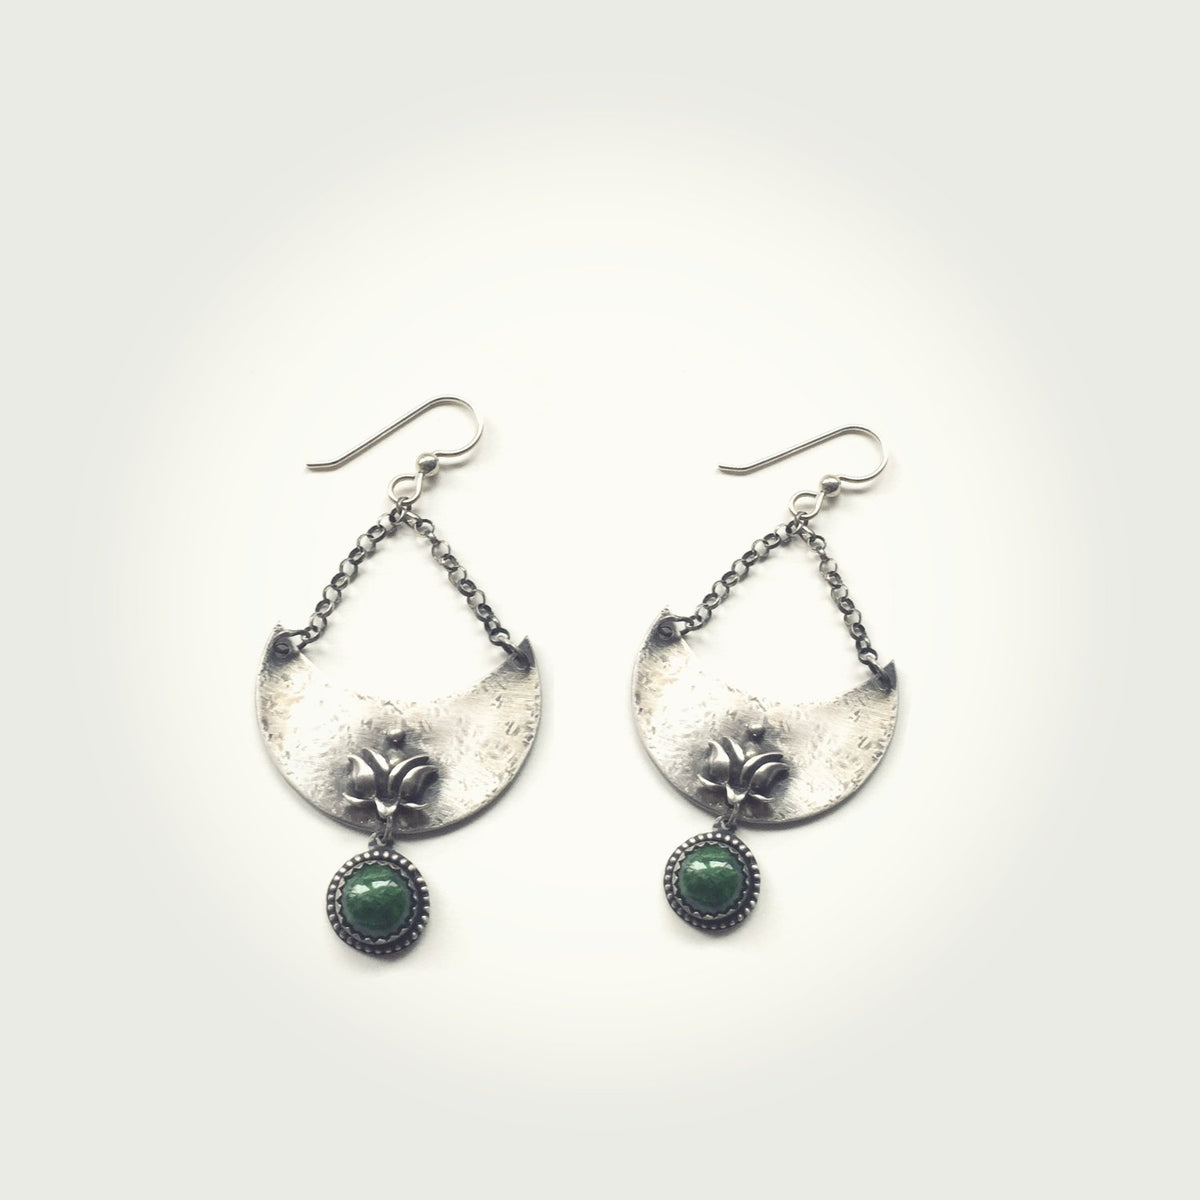 Crescent Moon and Lotus Earrings with Chrome Diopside